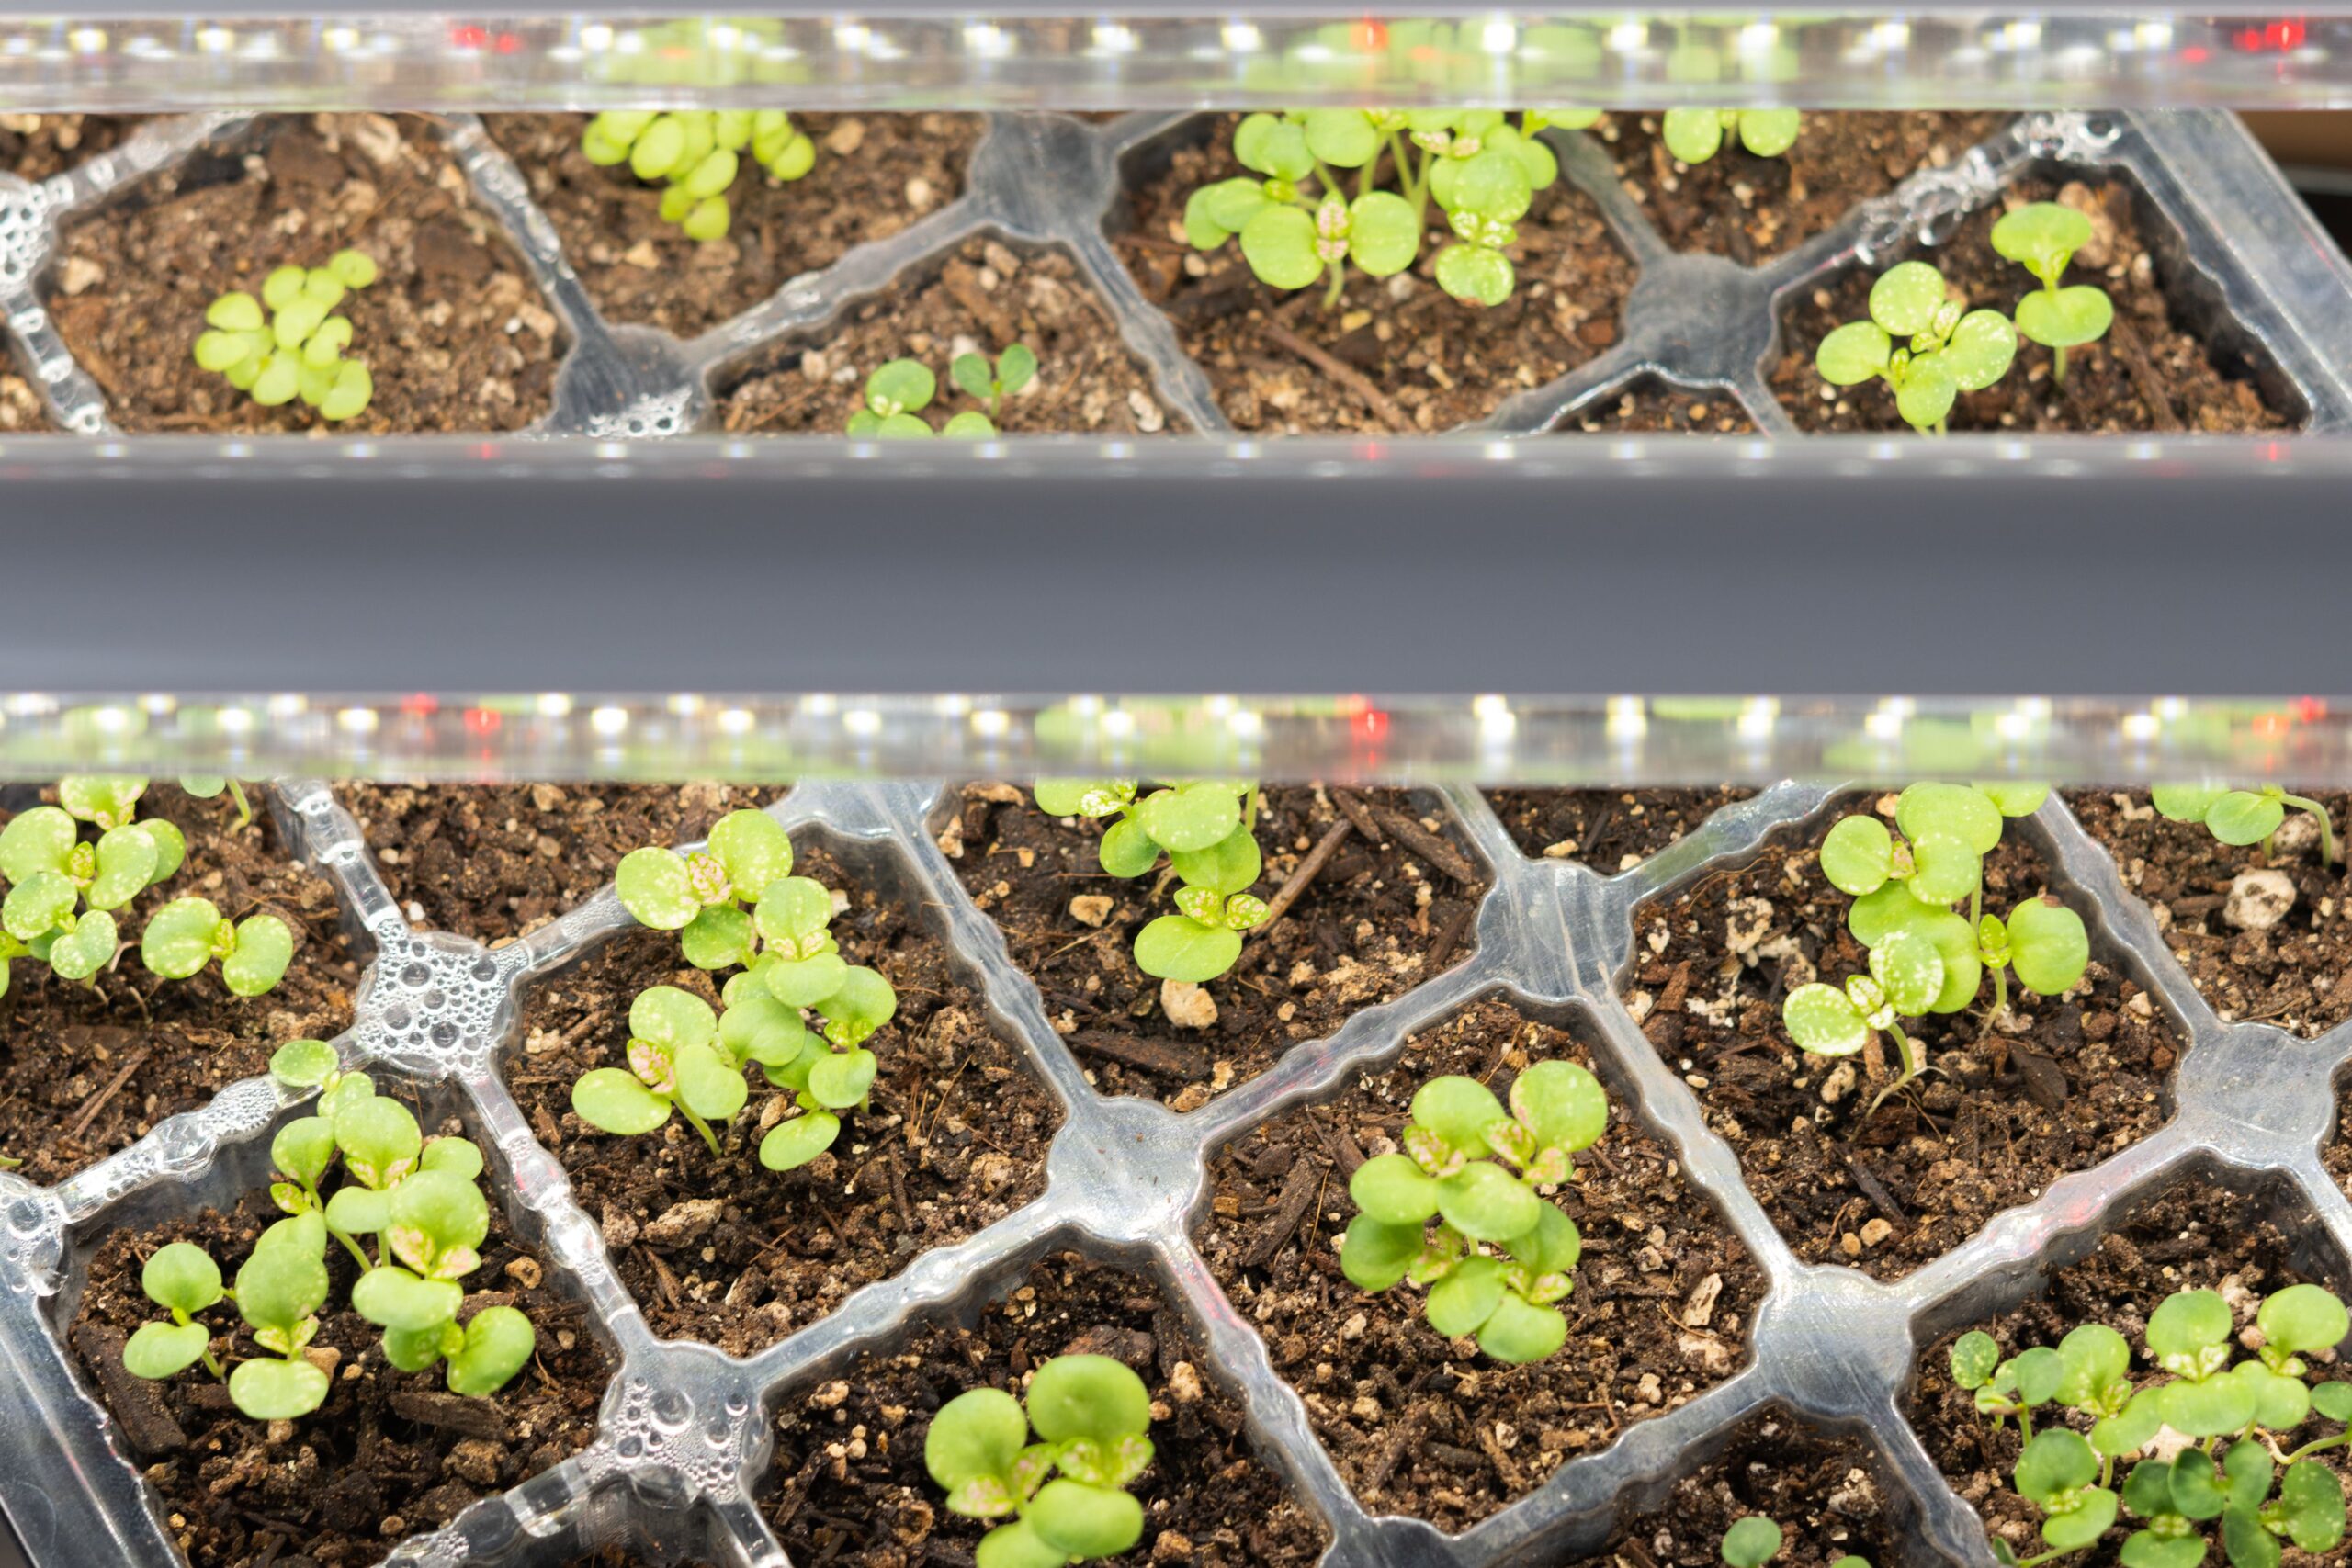 Best Practices For Seedling Lighting To Promote Growth